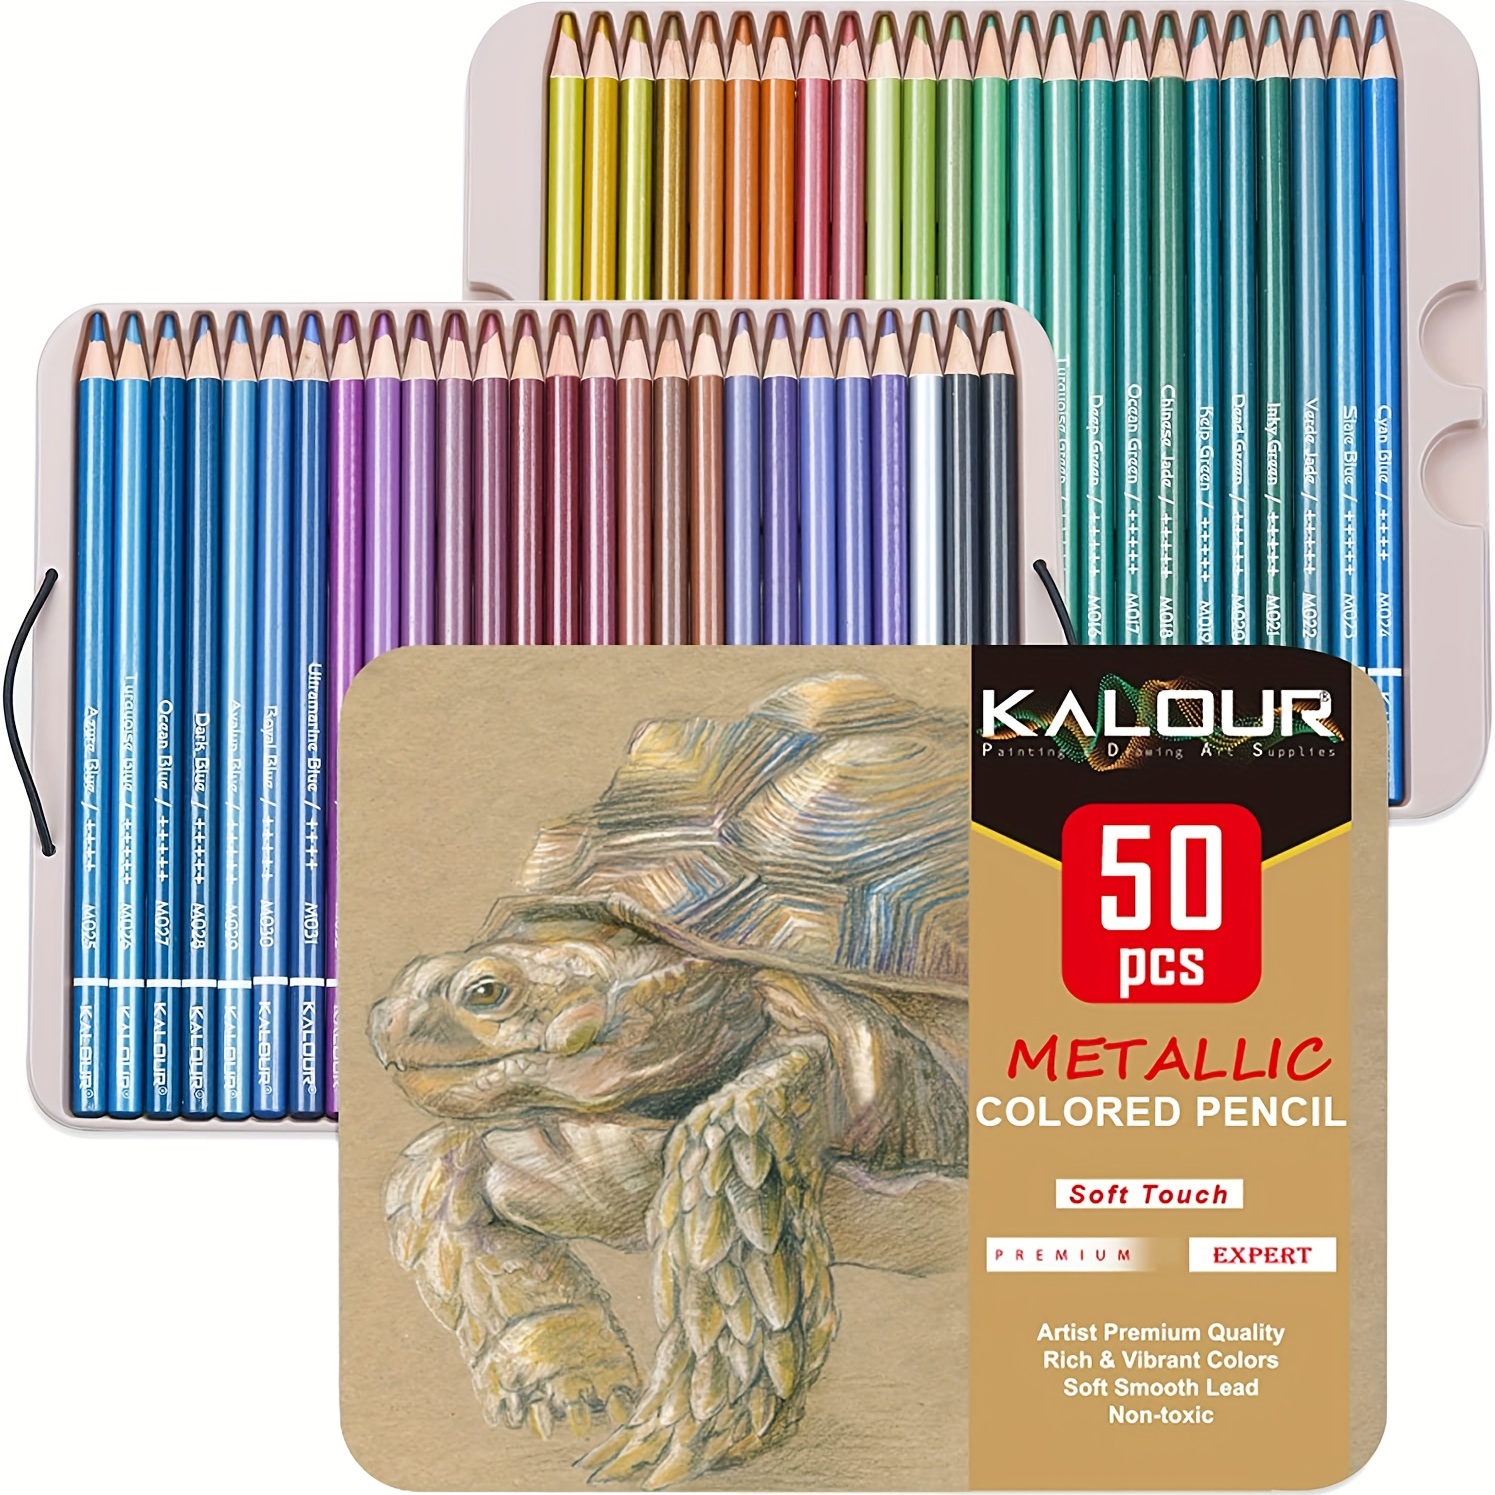 Ccfoud Colored Pencils Color Pencil Set For Adult Coloring Book Gifts For  Kids & Adults 72count